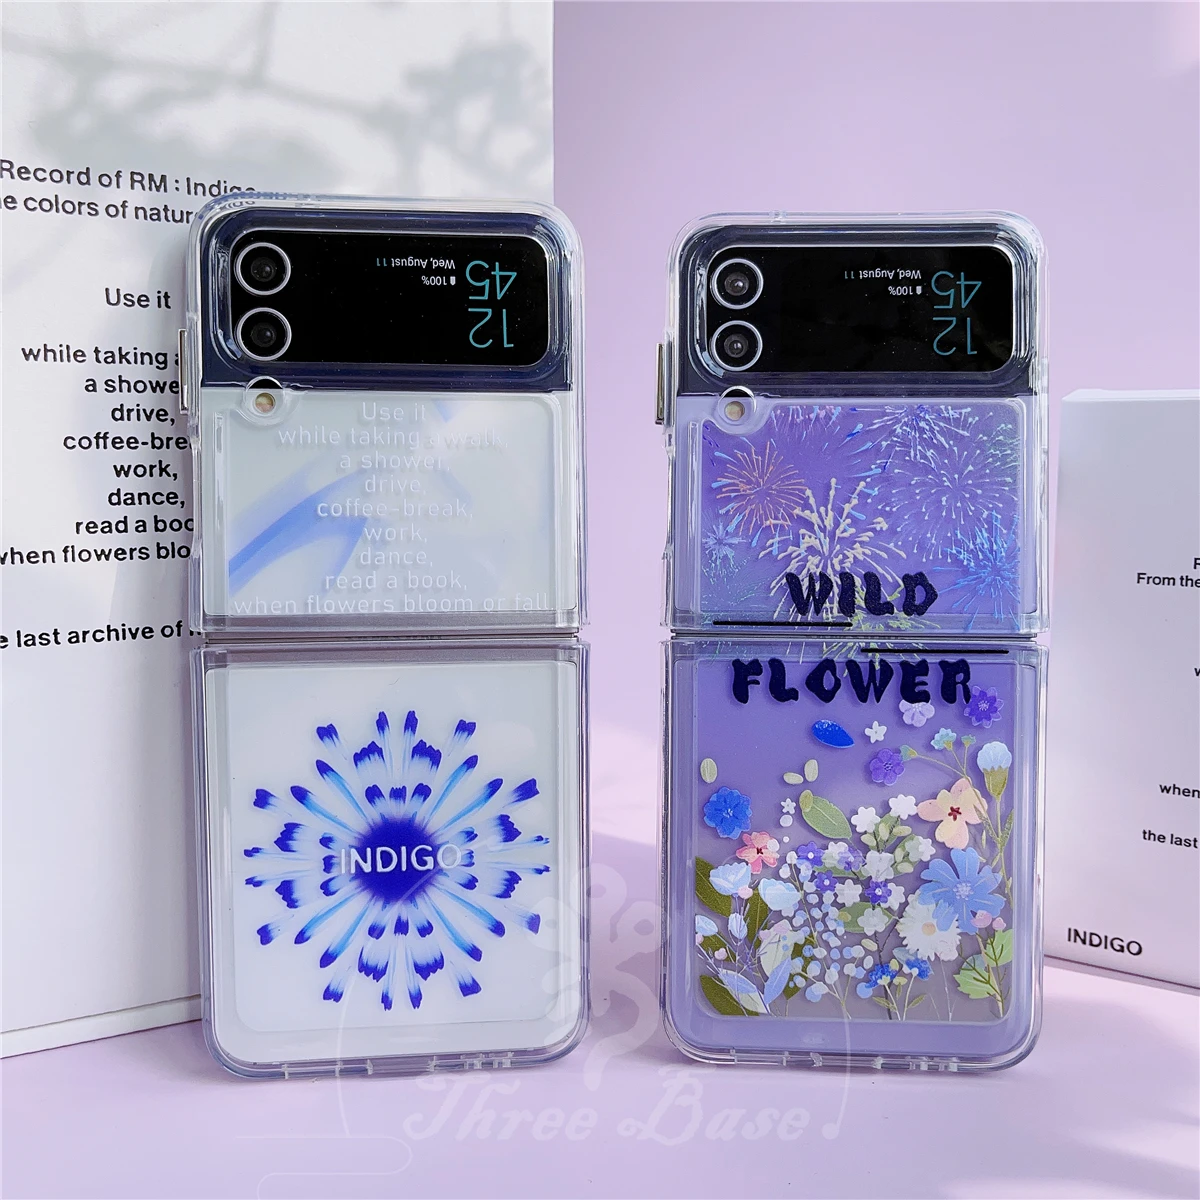 

Phone case For Samsung Zflip 3 Zflip 4 RM INDIGO Wild flower Anti Shock Drop Proof Space Cover